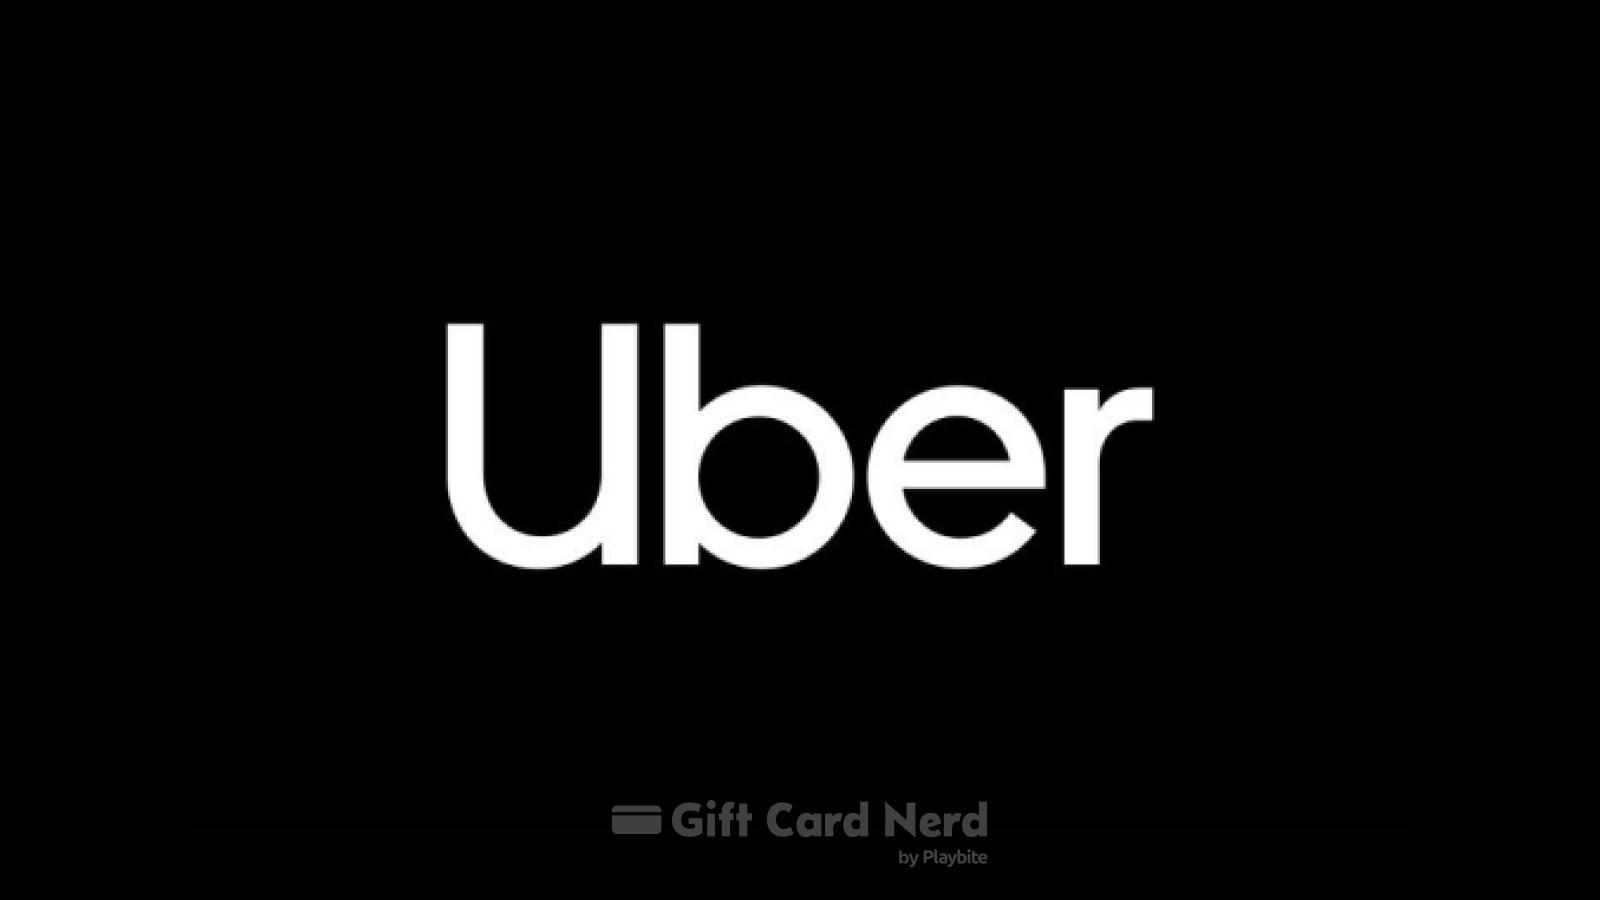 Can I Use an Uber Gift Card on Apple Wallet?